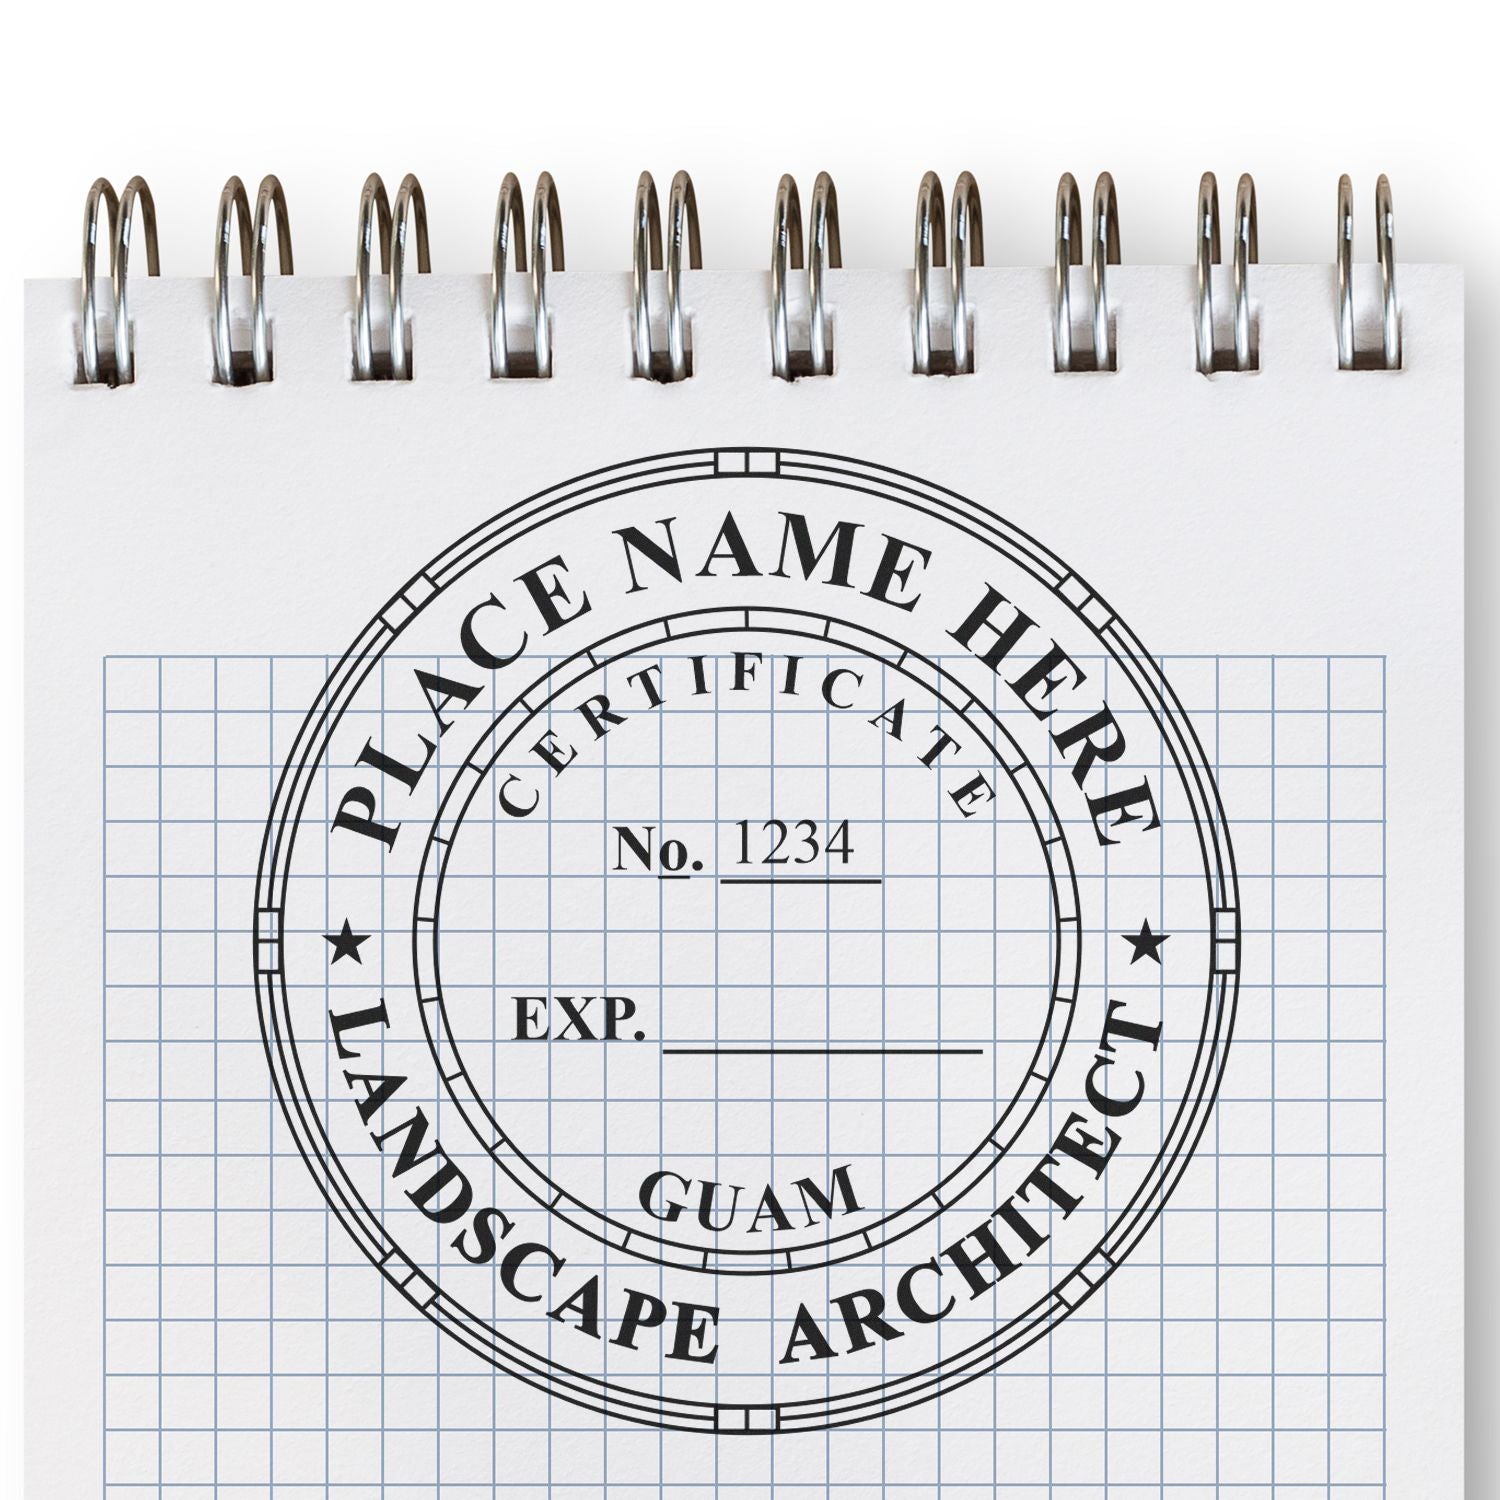 The main image for the Self-Inking Guam Landscape Architect Stamp depicting a sample of the imprint and electronic files